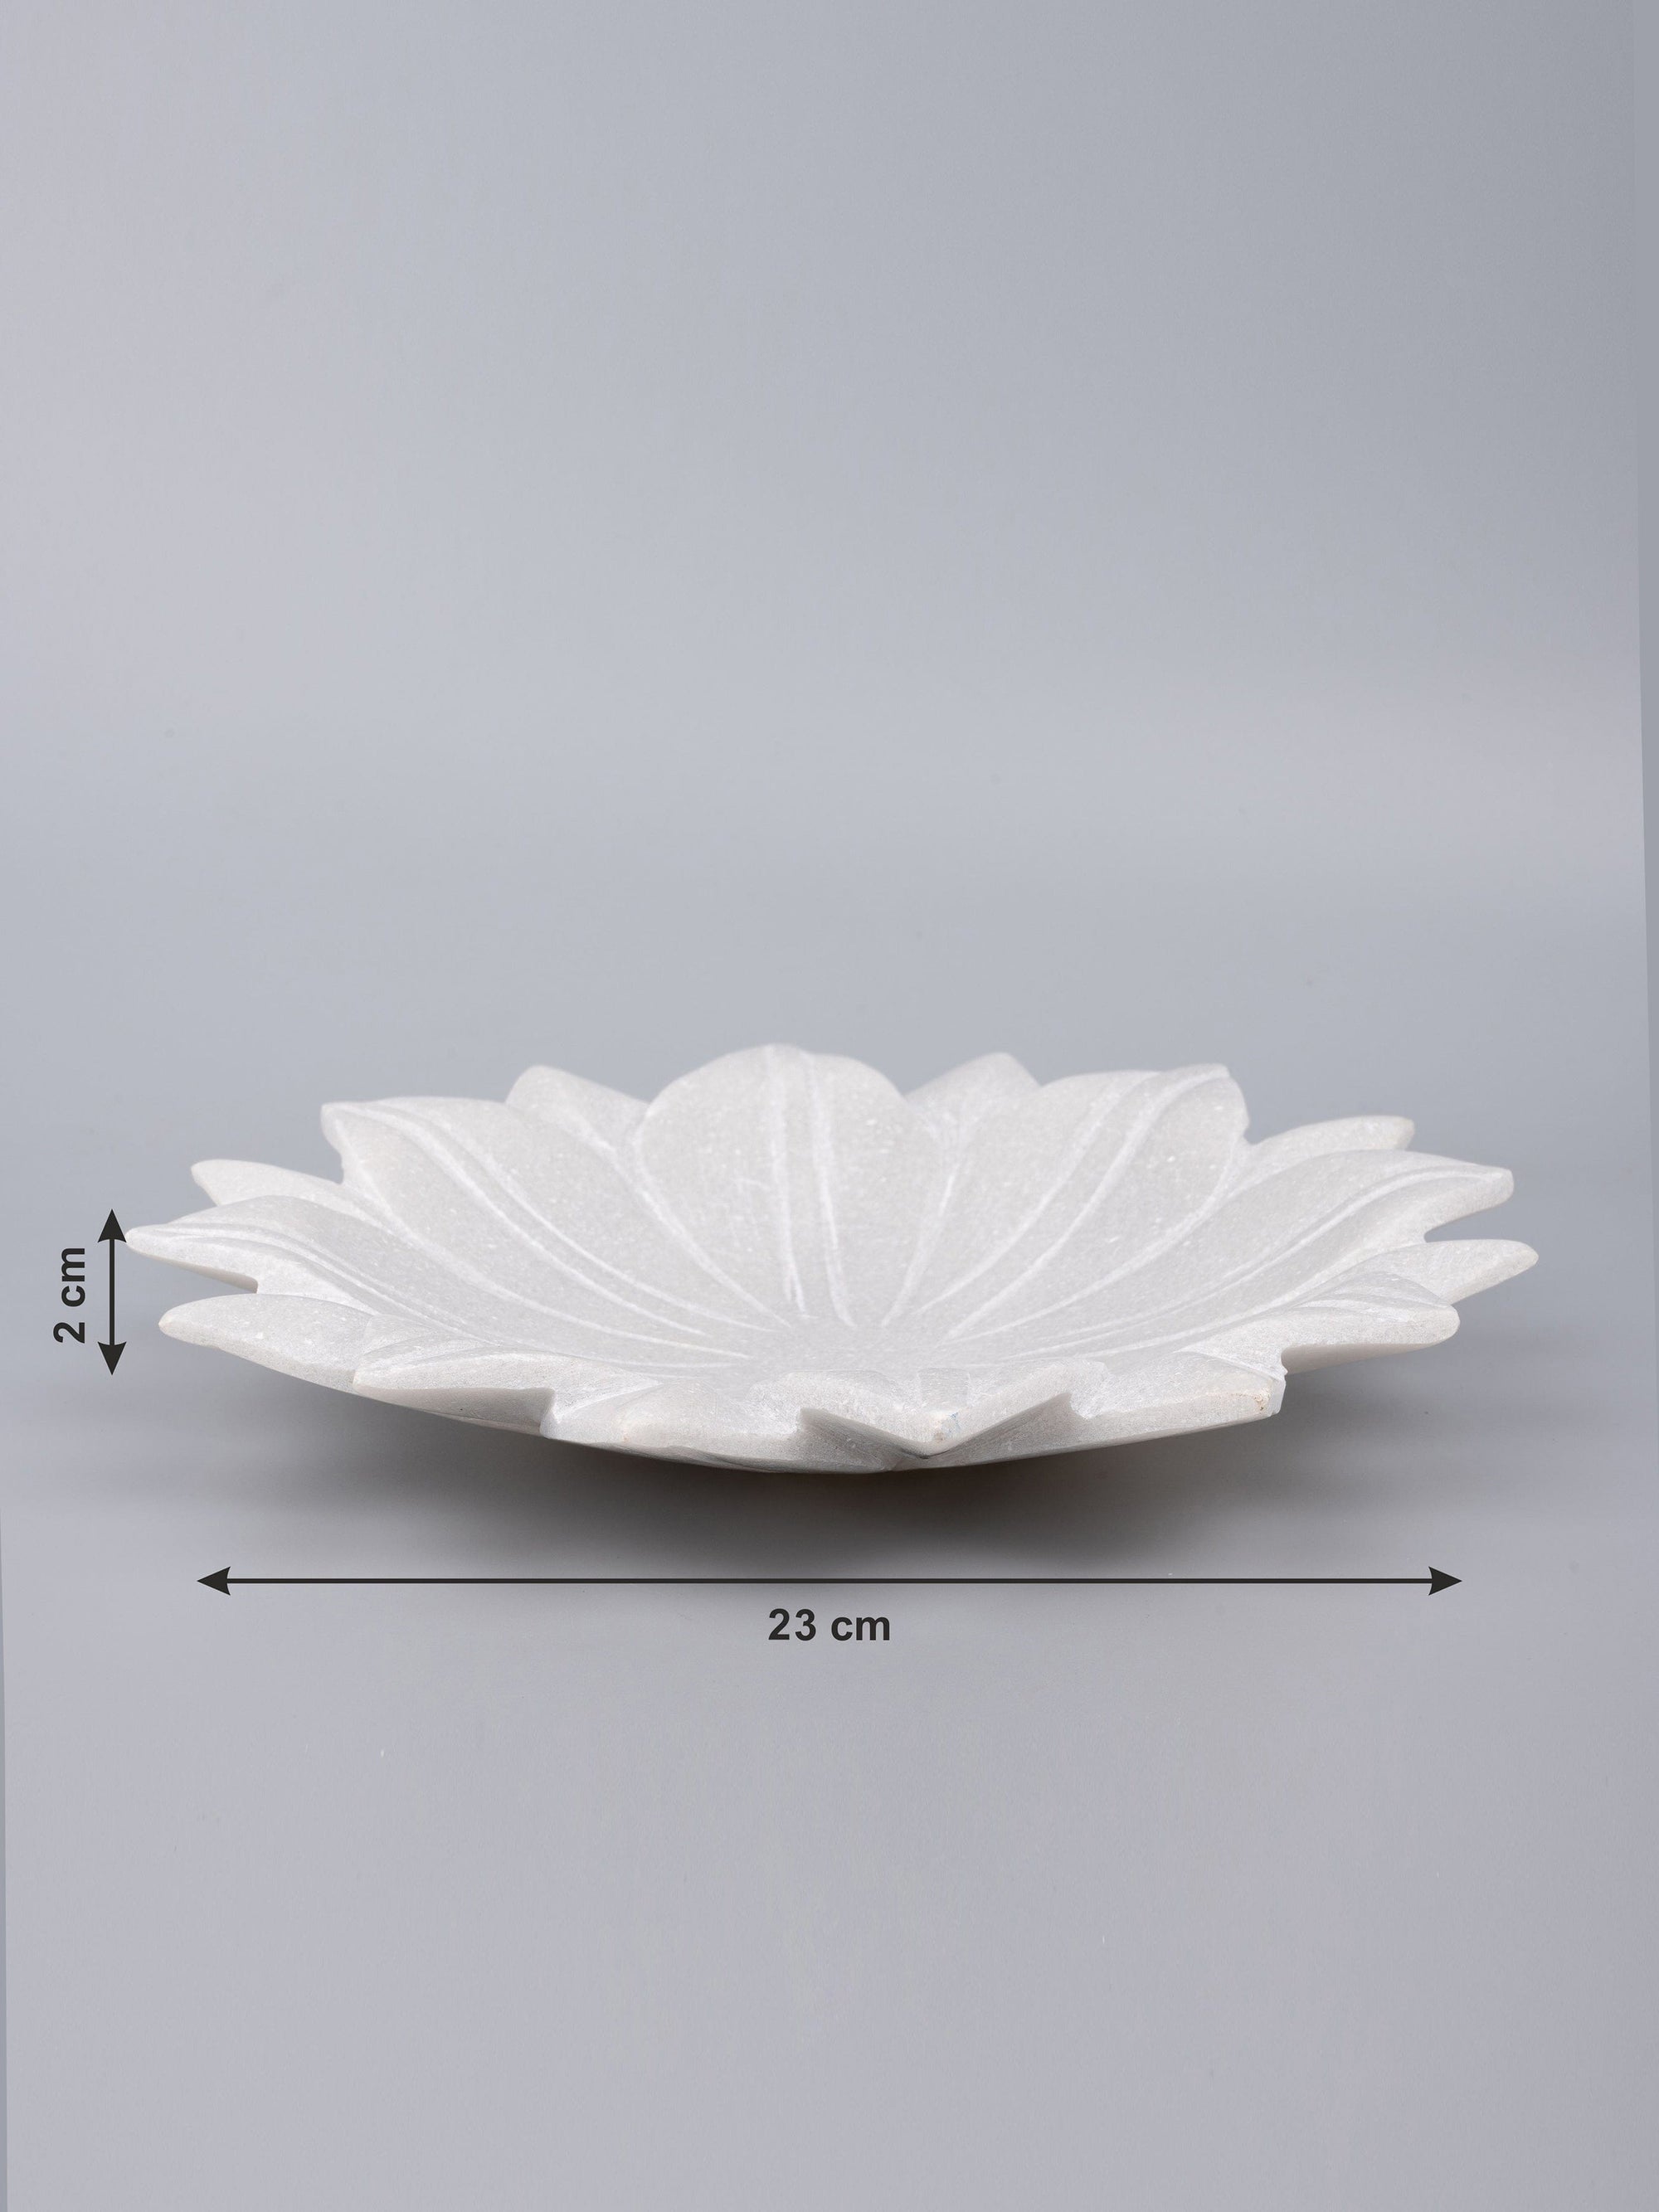 Lotus Urli bowl / plate made of pure white marble - 5 inches - The Heritage Artifacts